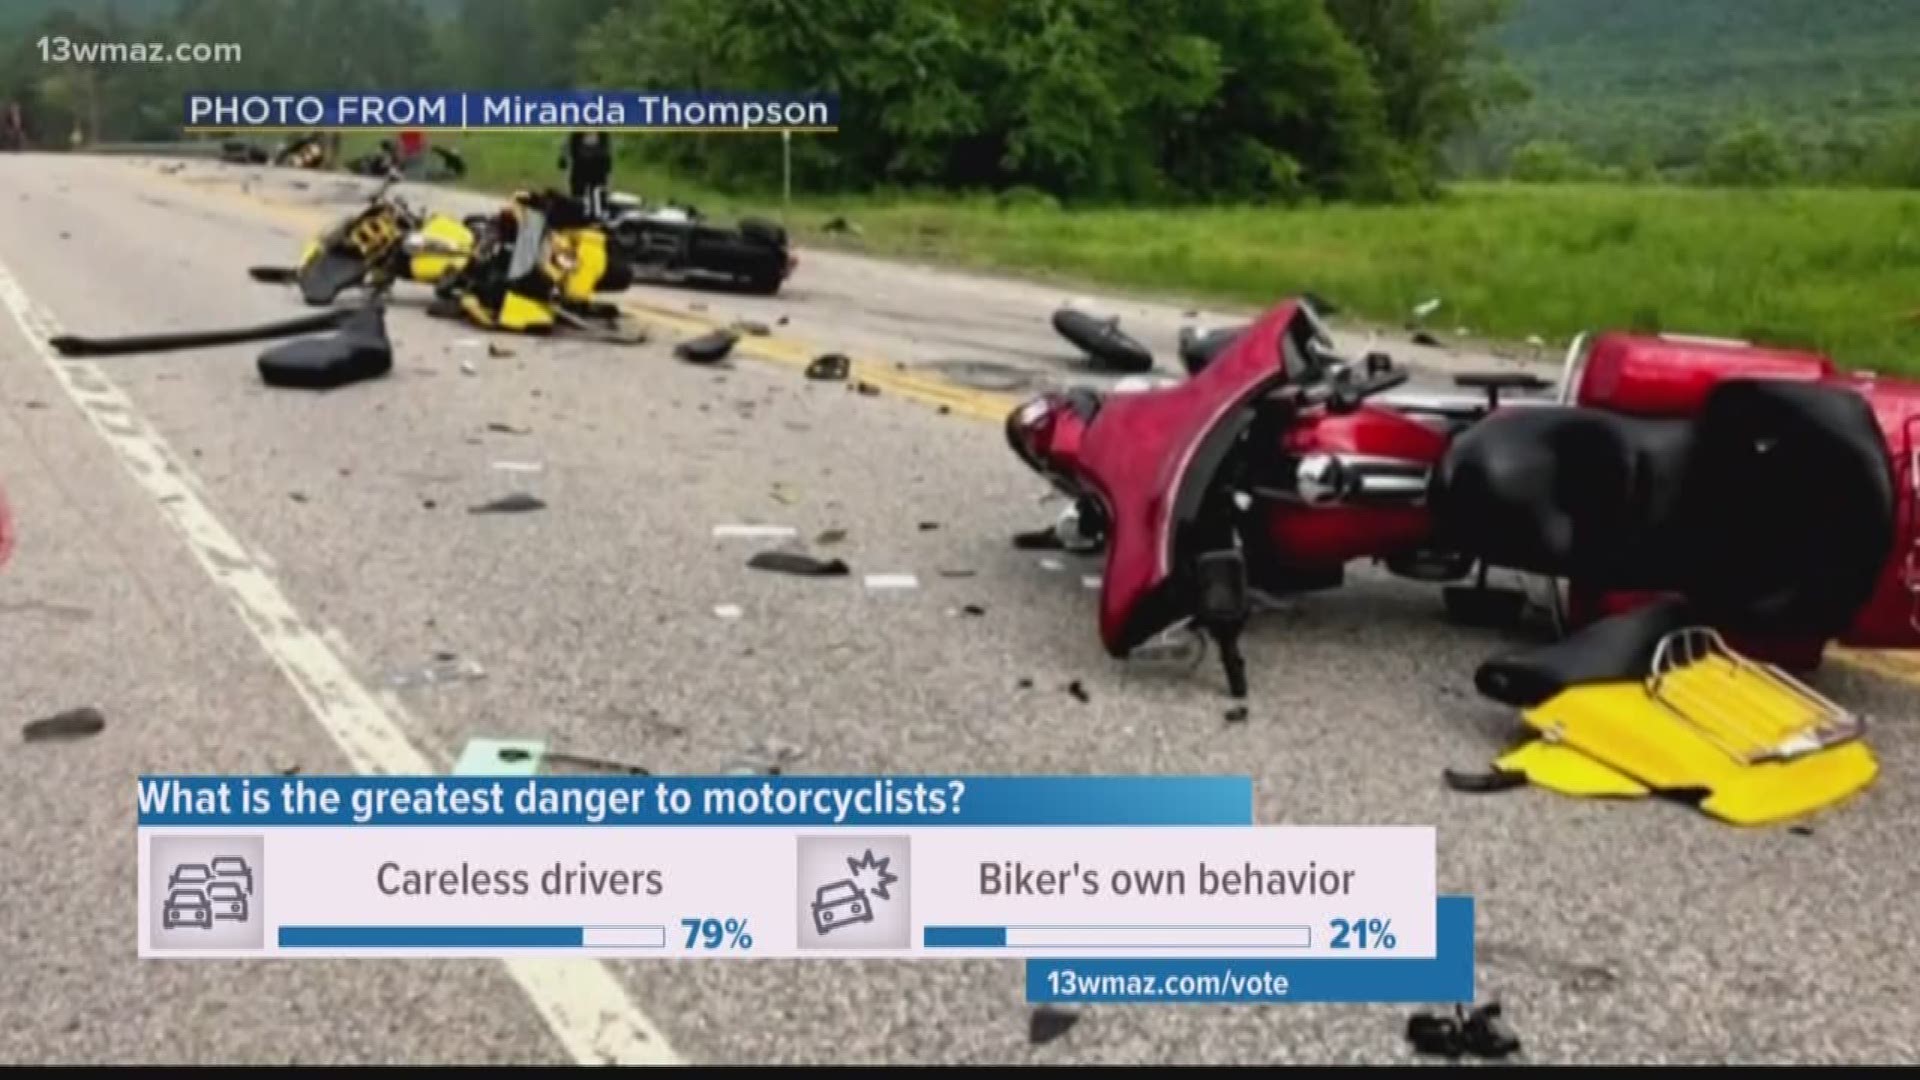 A catastrophic crash this summer killed 7 motorcycle riders in New Hampshire. Now, a Warner Robins man is gearing up to ride in their honor and bring awareness to motorcycle safety on the roads.